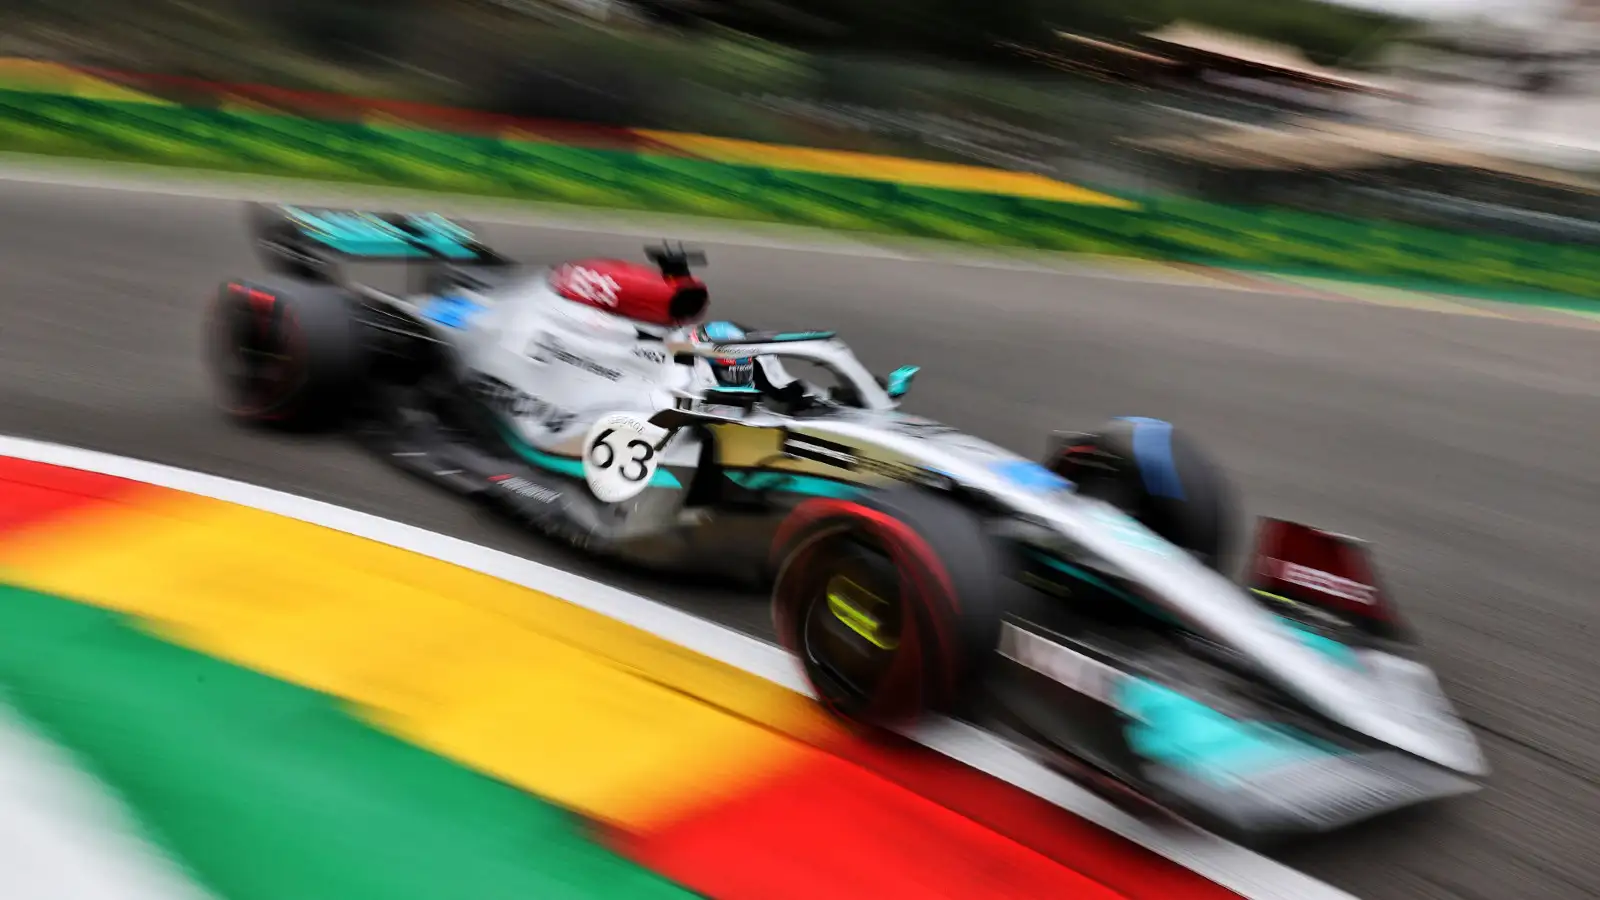 Mercedes' George Russell at the Belgian Grand Prix. Spa-Francorchamps, August 2022.